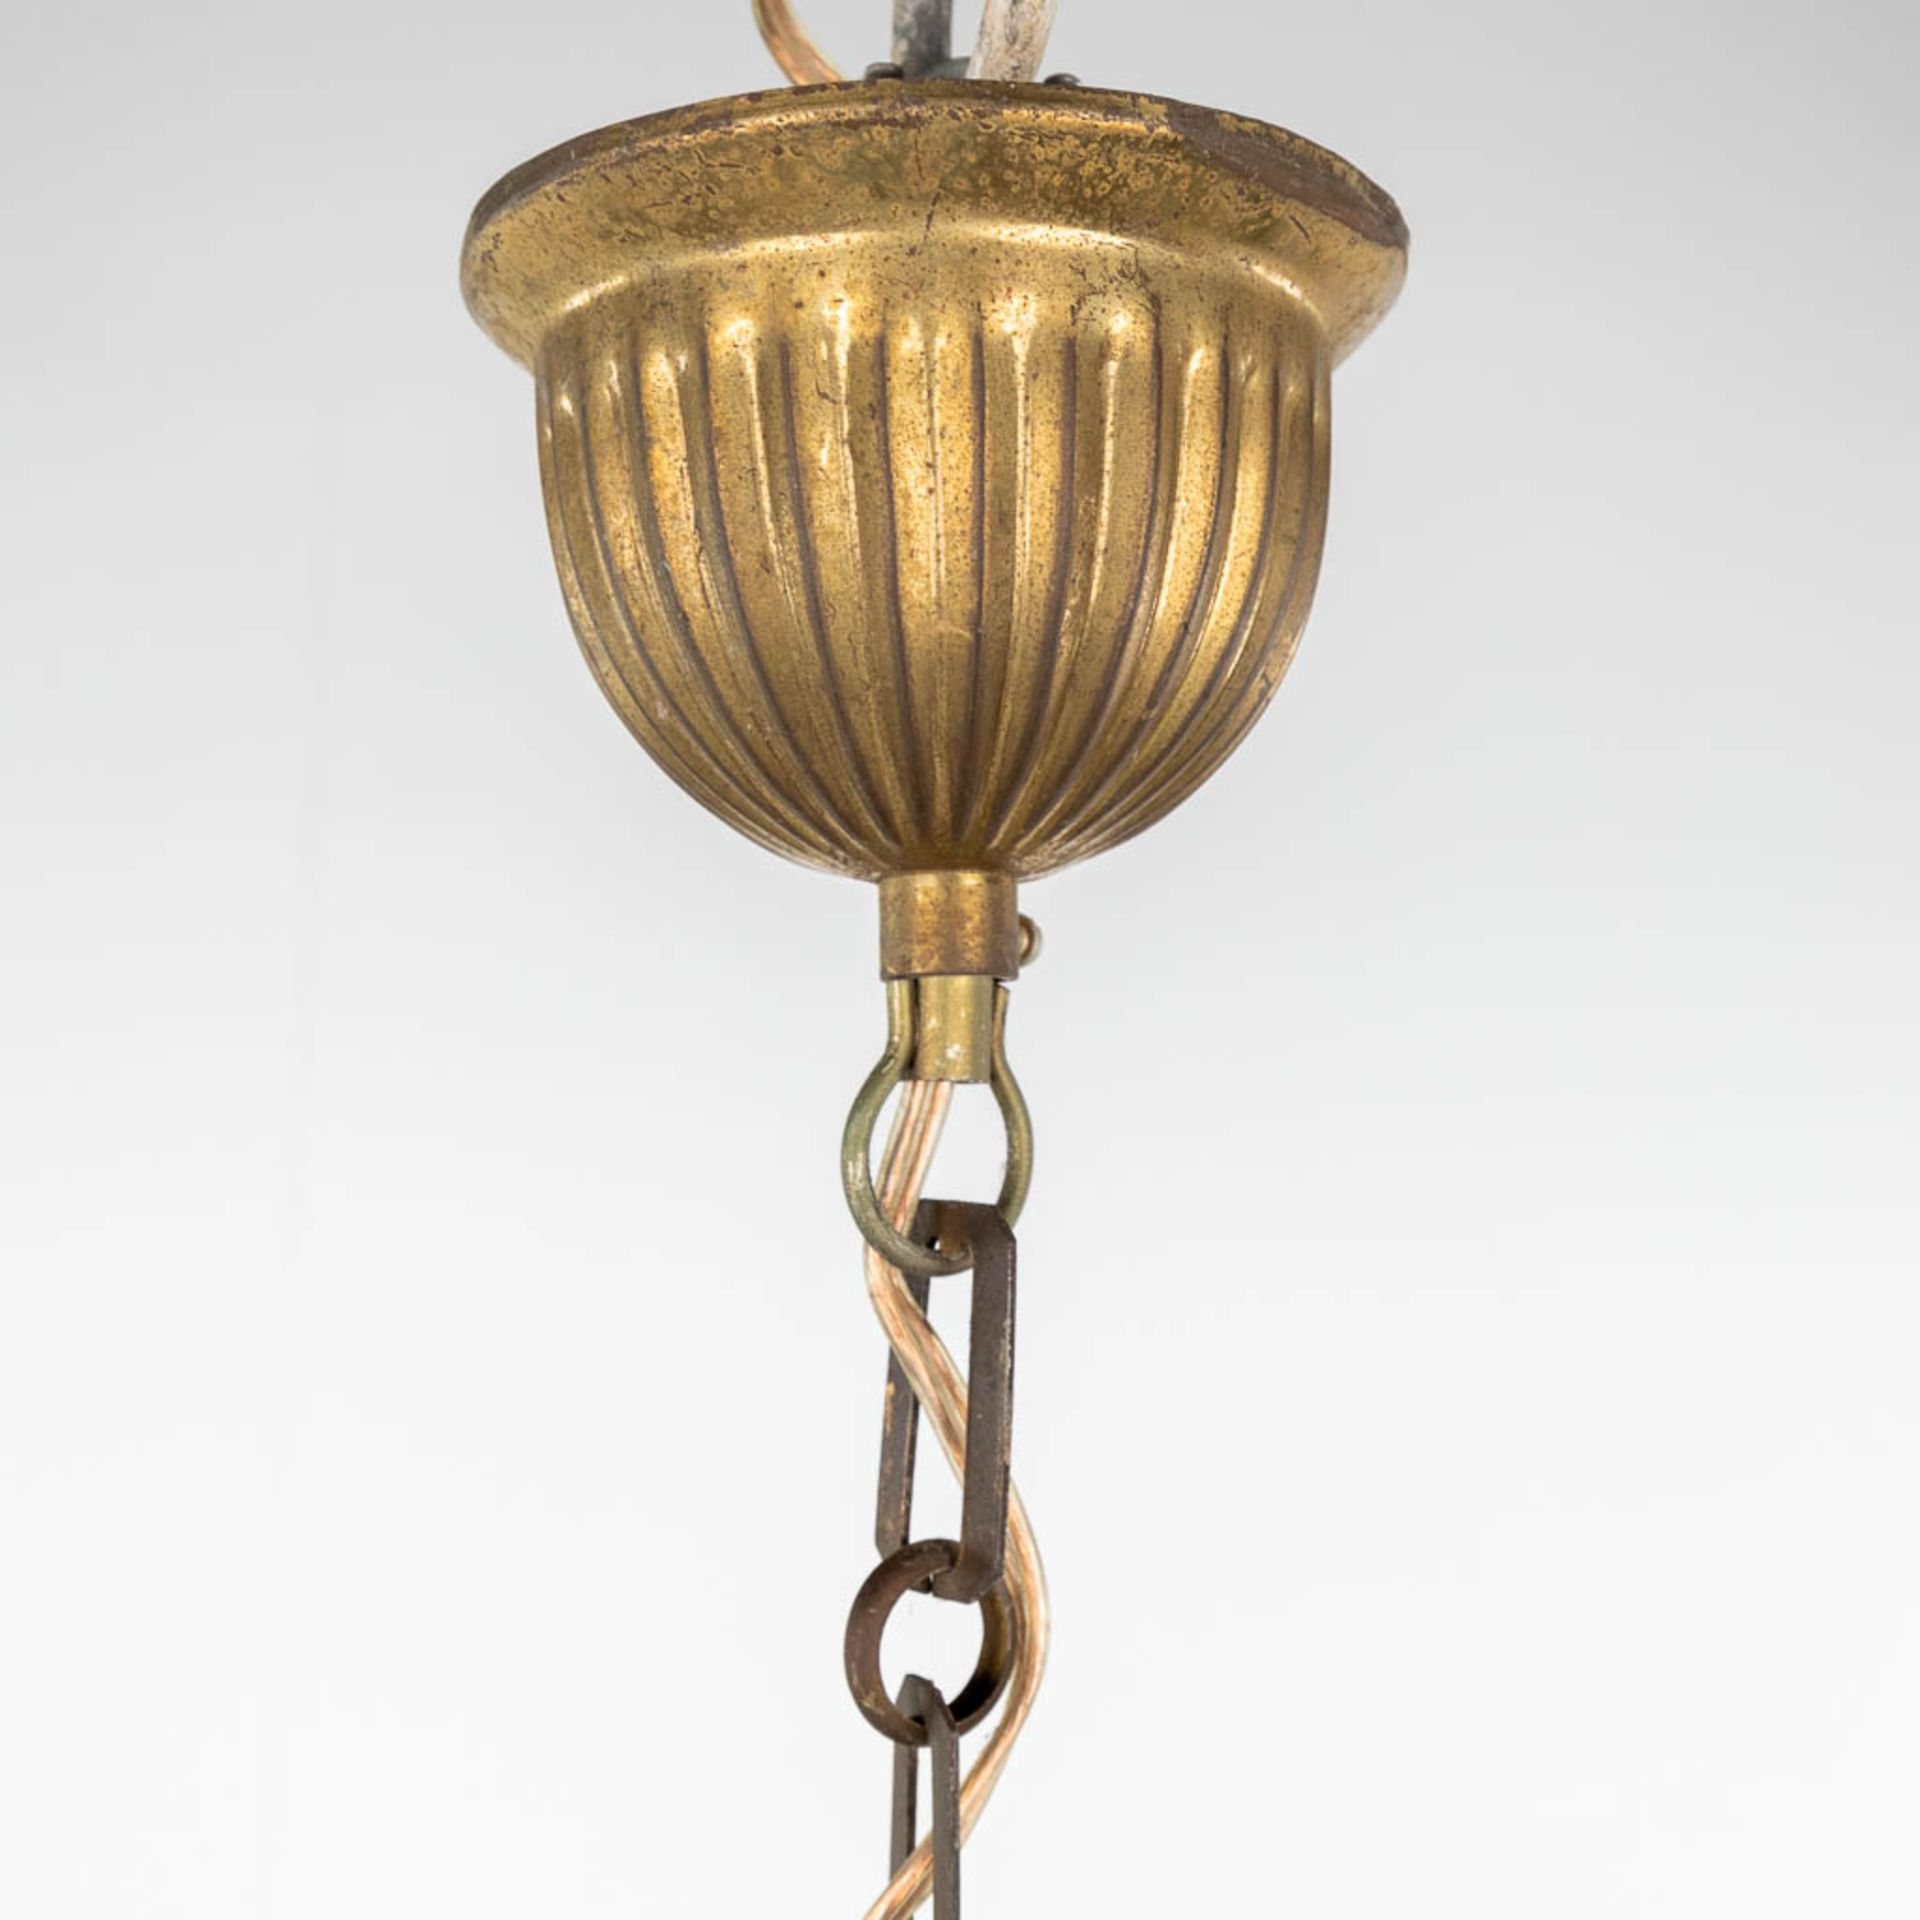 A chandelier 'Sac ˆ Perles', bronze and glass in empire style. 20th C. (H: 100 x D: 50 cm) - Bild 10 aus 11